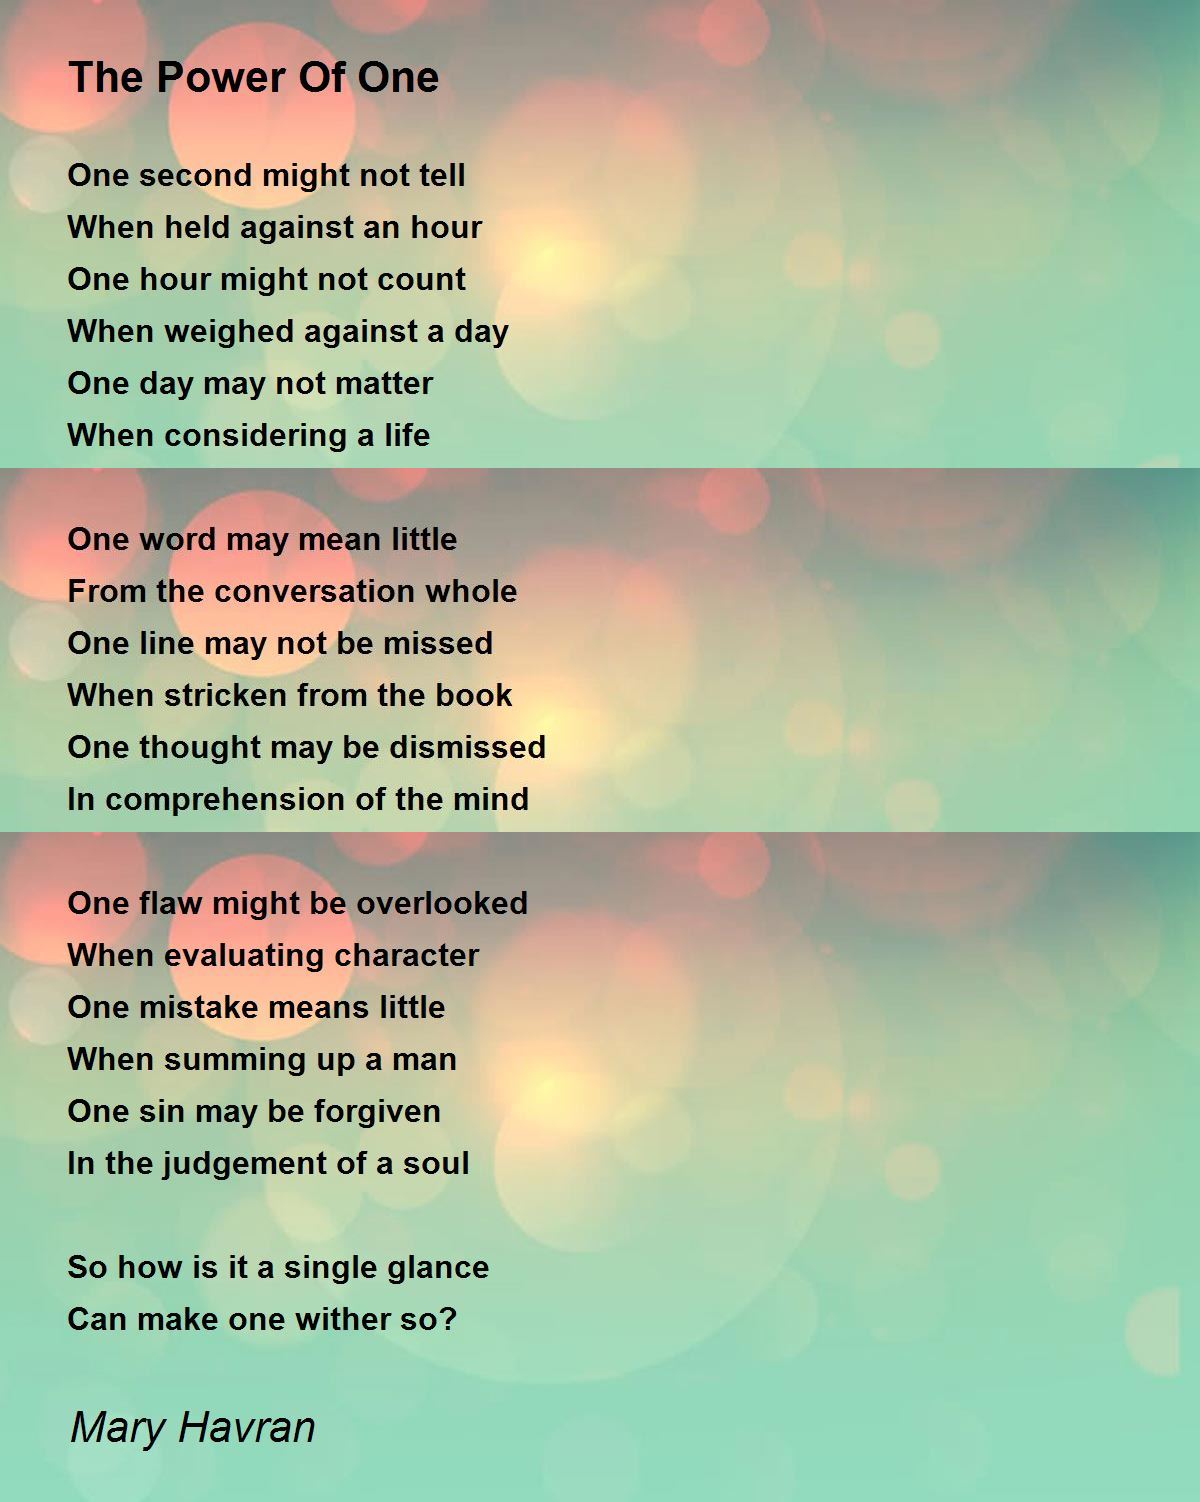 The Power Of One Poem by Mary Havran - Poem Hunter